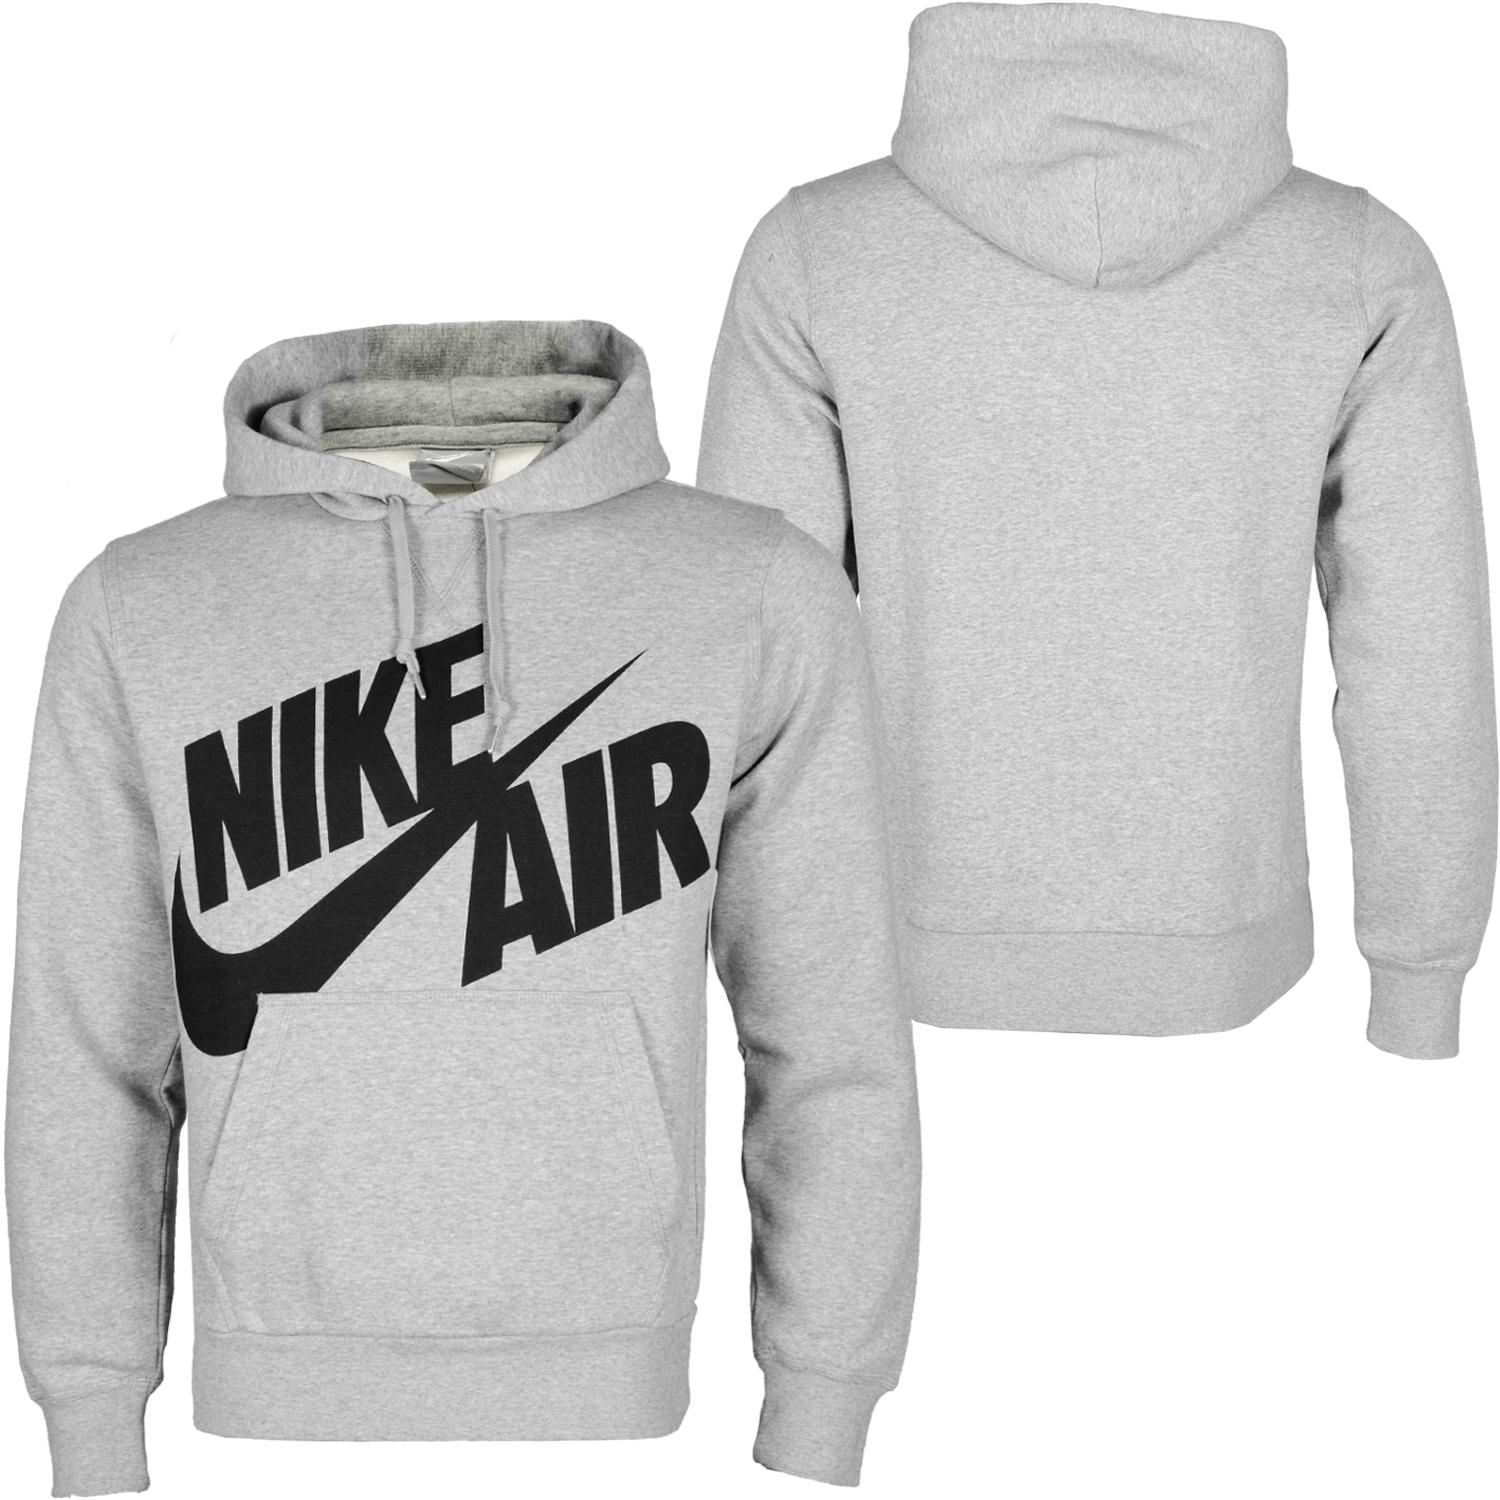 Foto Nike Bb Oversized Nike Air Hombres Sudaderas Con Capucha Gris Negro foto 815738